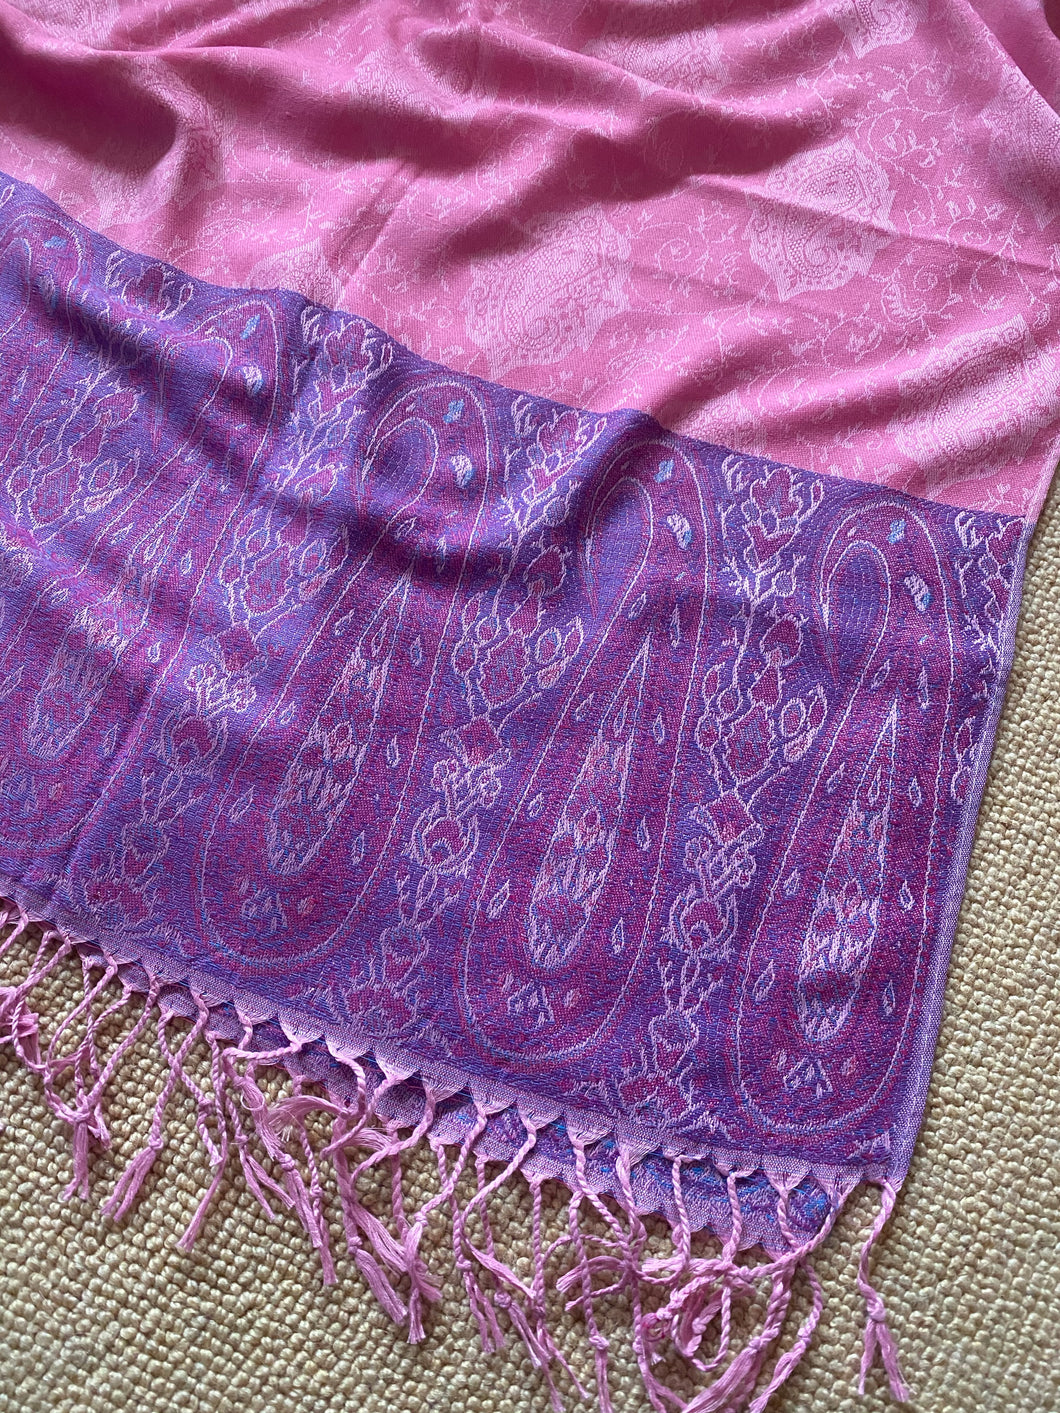 SU108 Amethyst, lavender and cyclamen with borders of paisley pattern, wool scarf